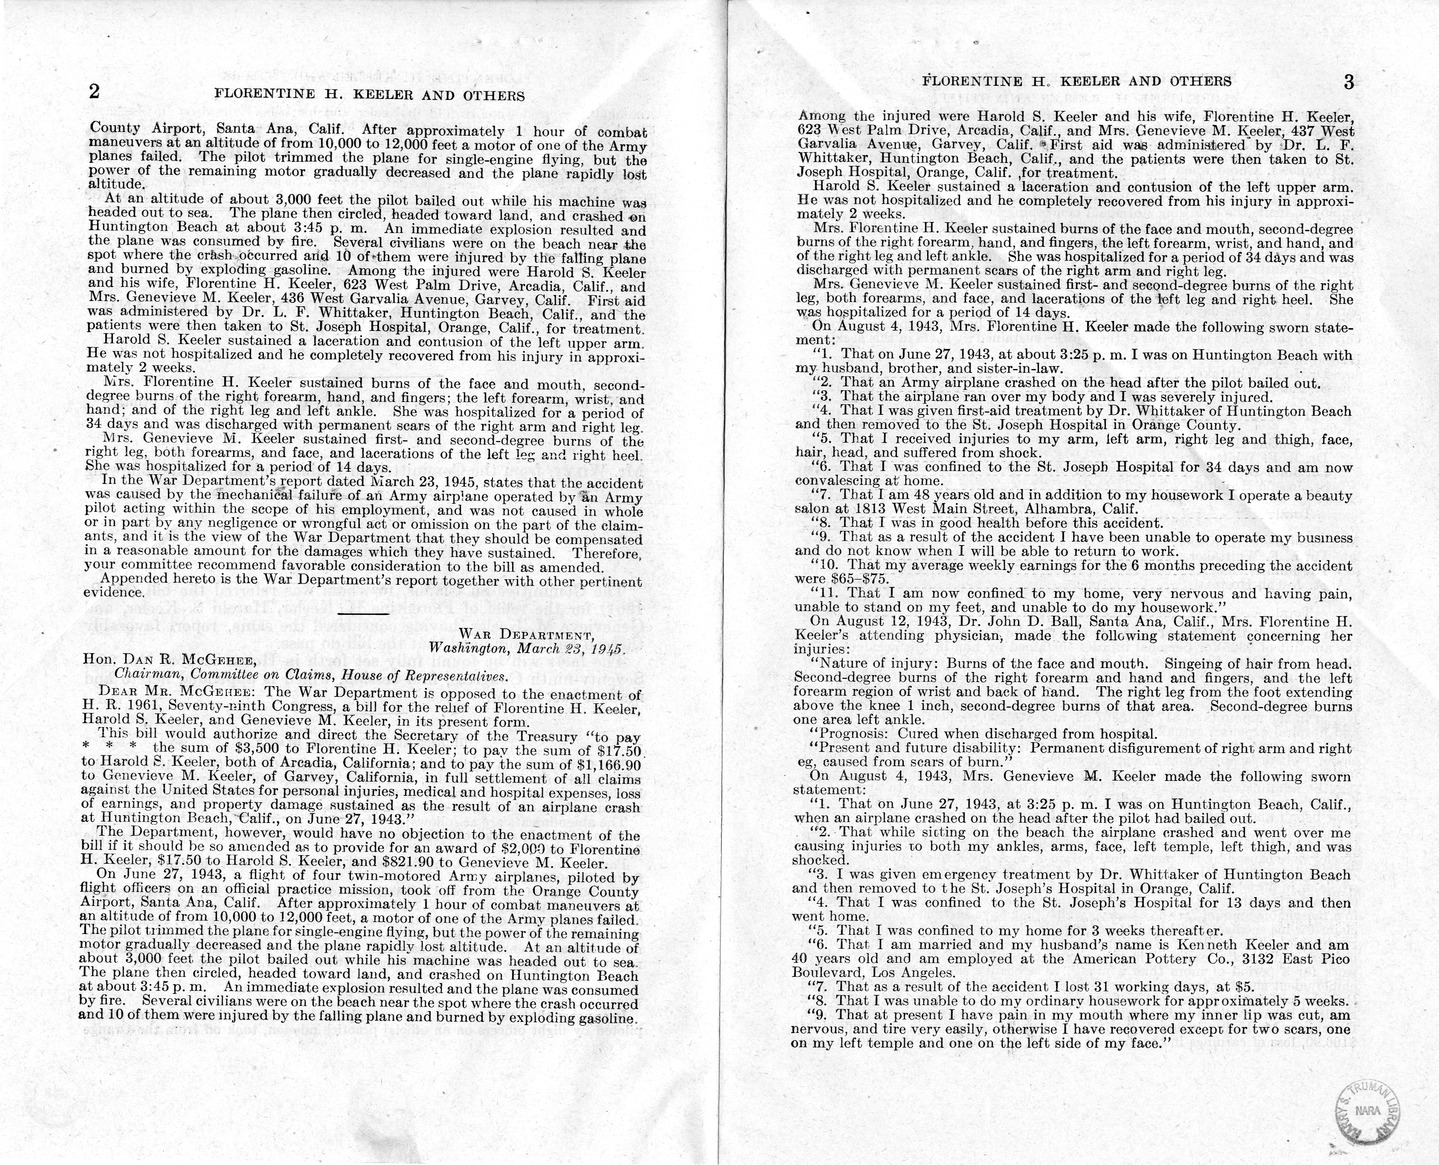 Memorandum from Frederick J. Bailey to M. C. Latta, H.R. 1961, For the Relief of Florentine H. Keeler, Harold S. Keeler, and Genevieve M. Keeler, with Attachments